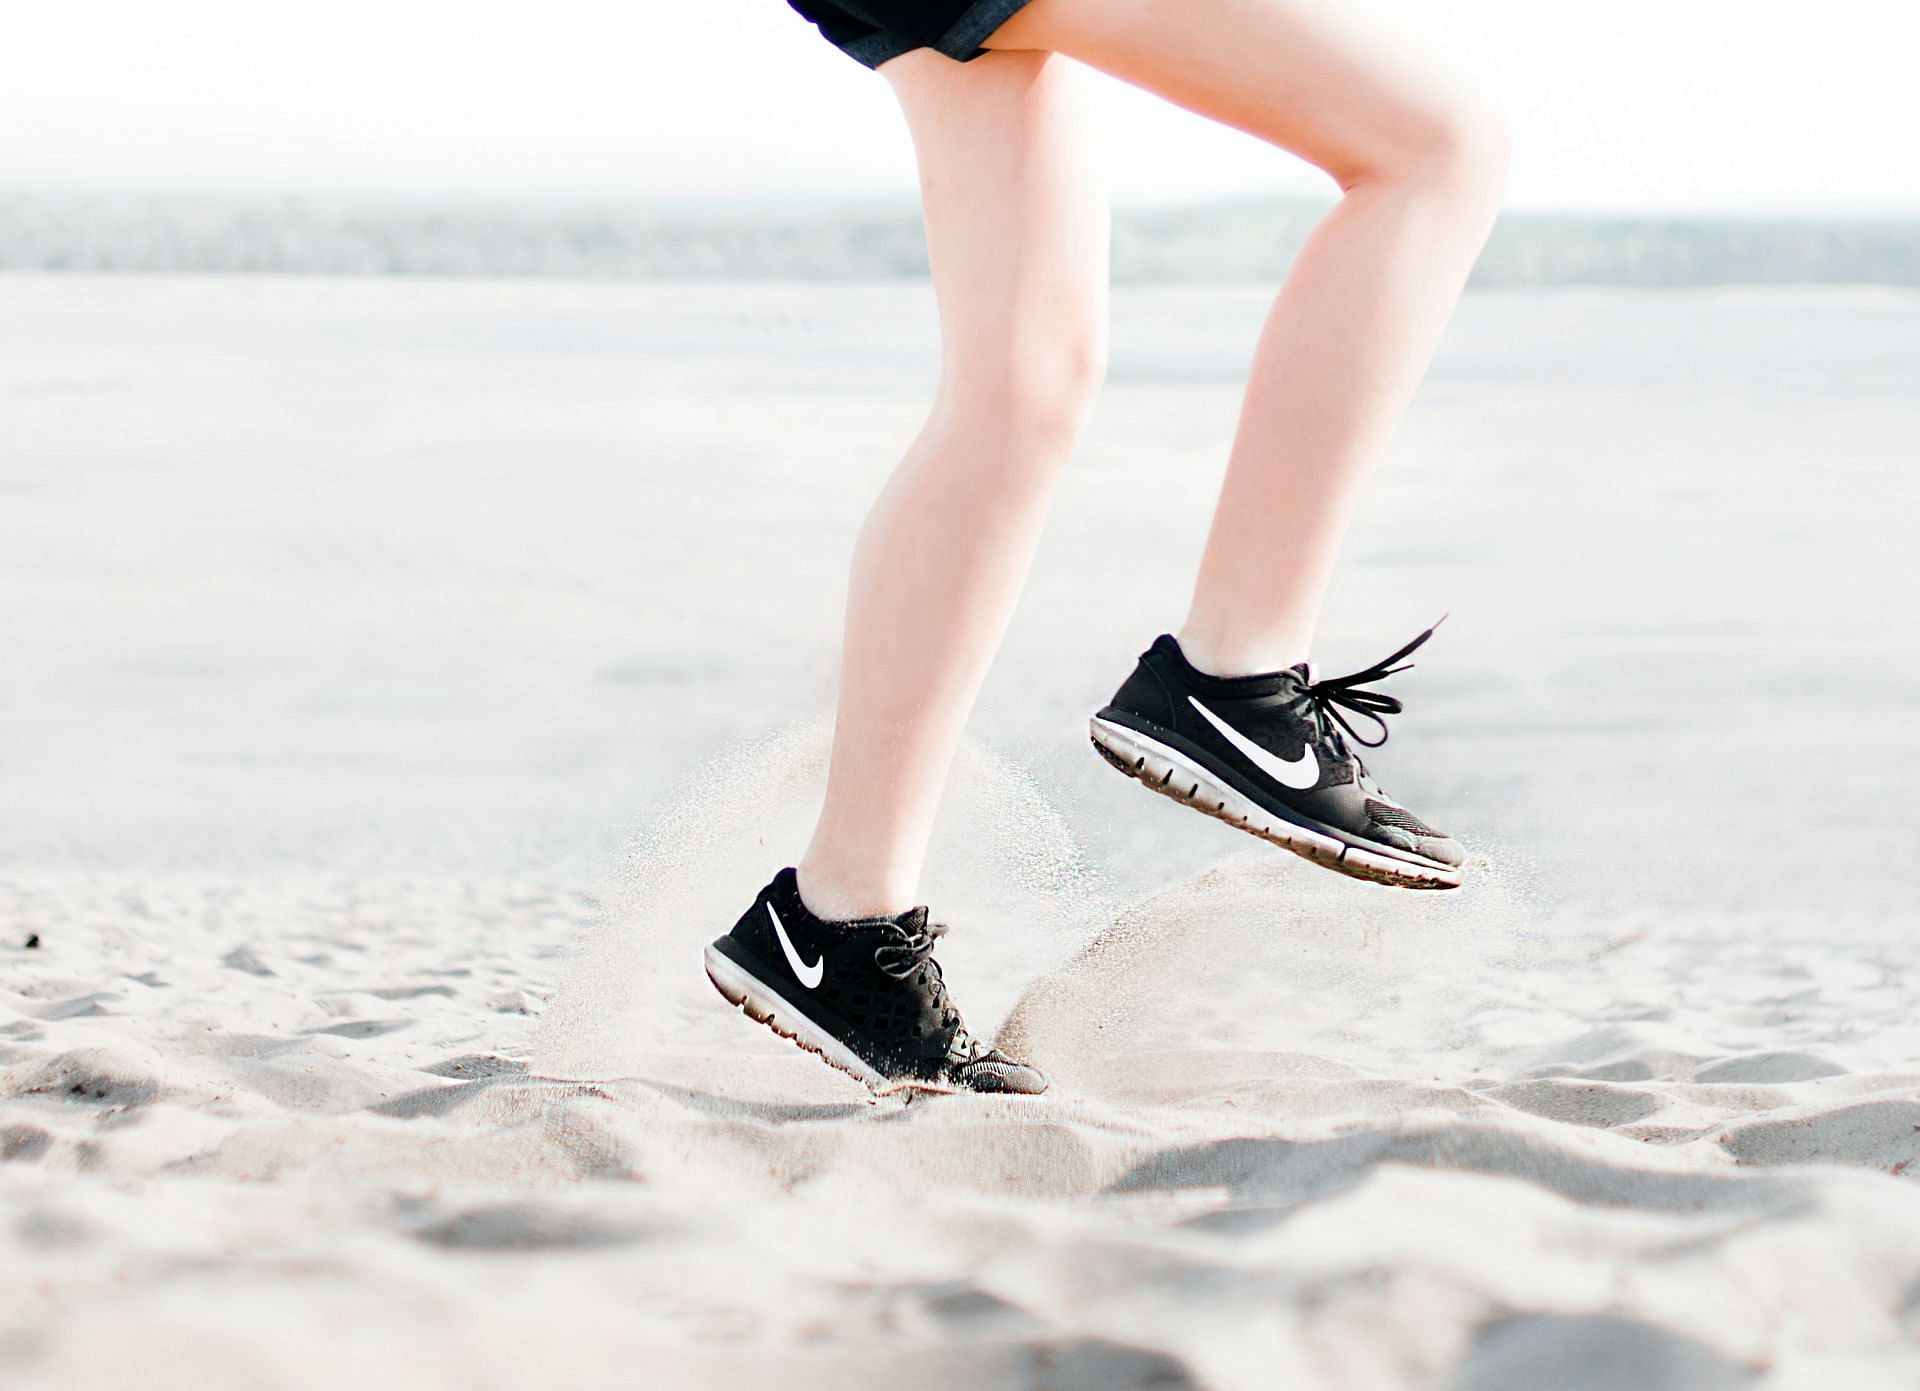 Strong calves help to propel you forward during walking and running (Image via Pexels/Dominika Roseclay)